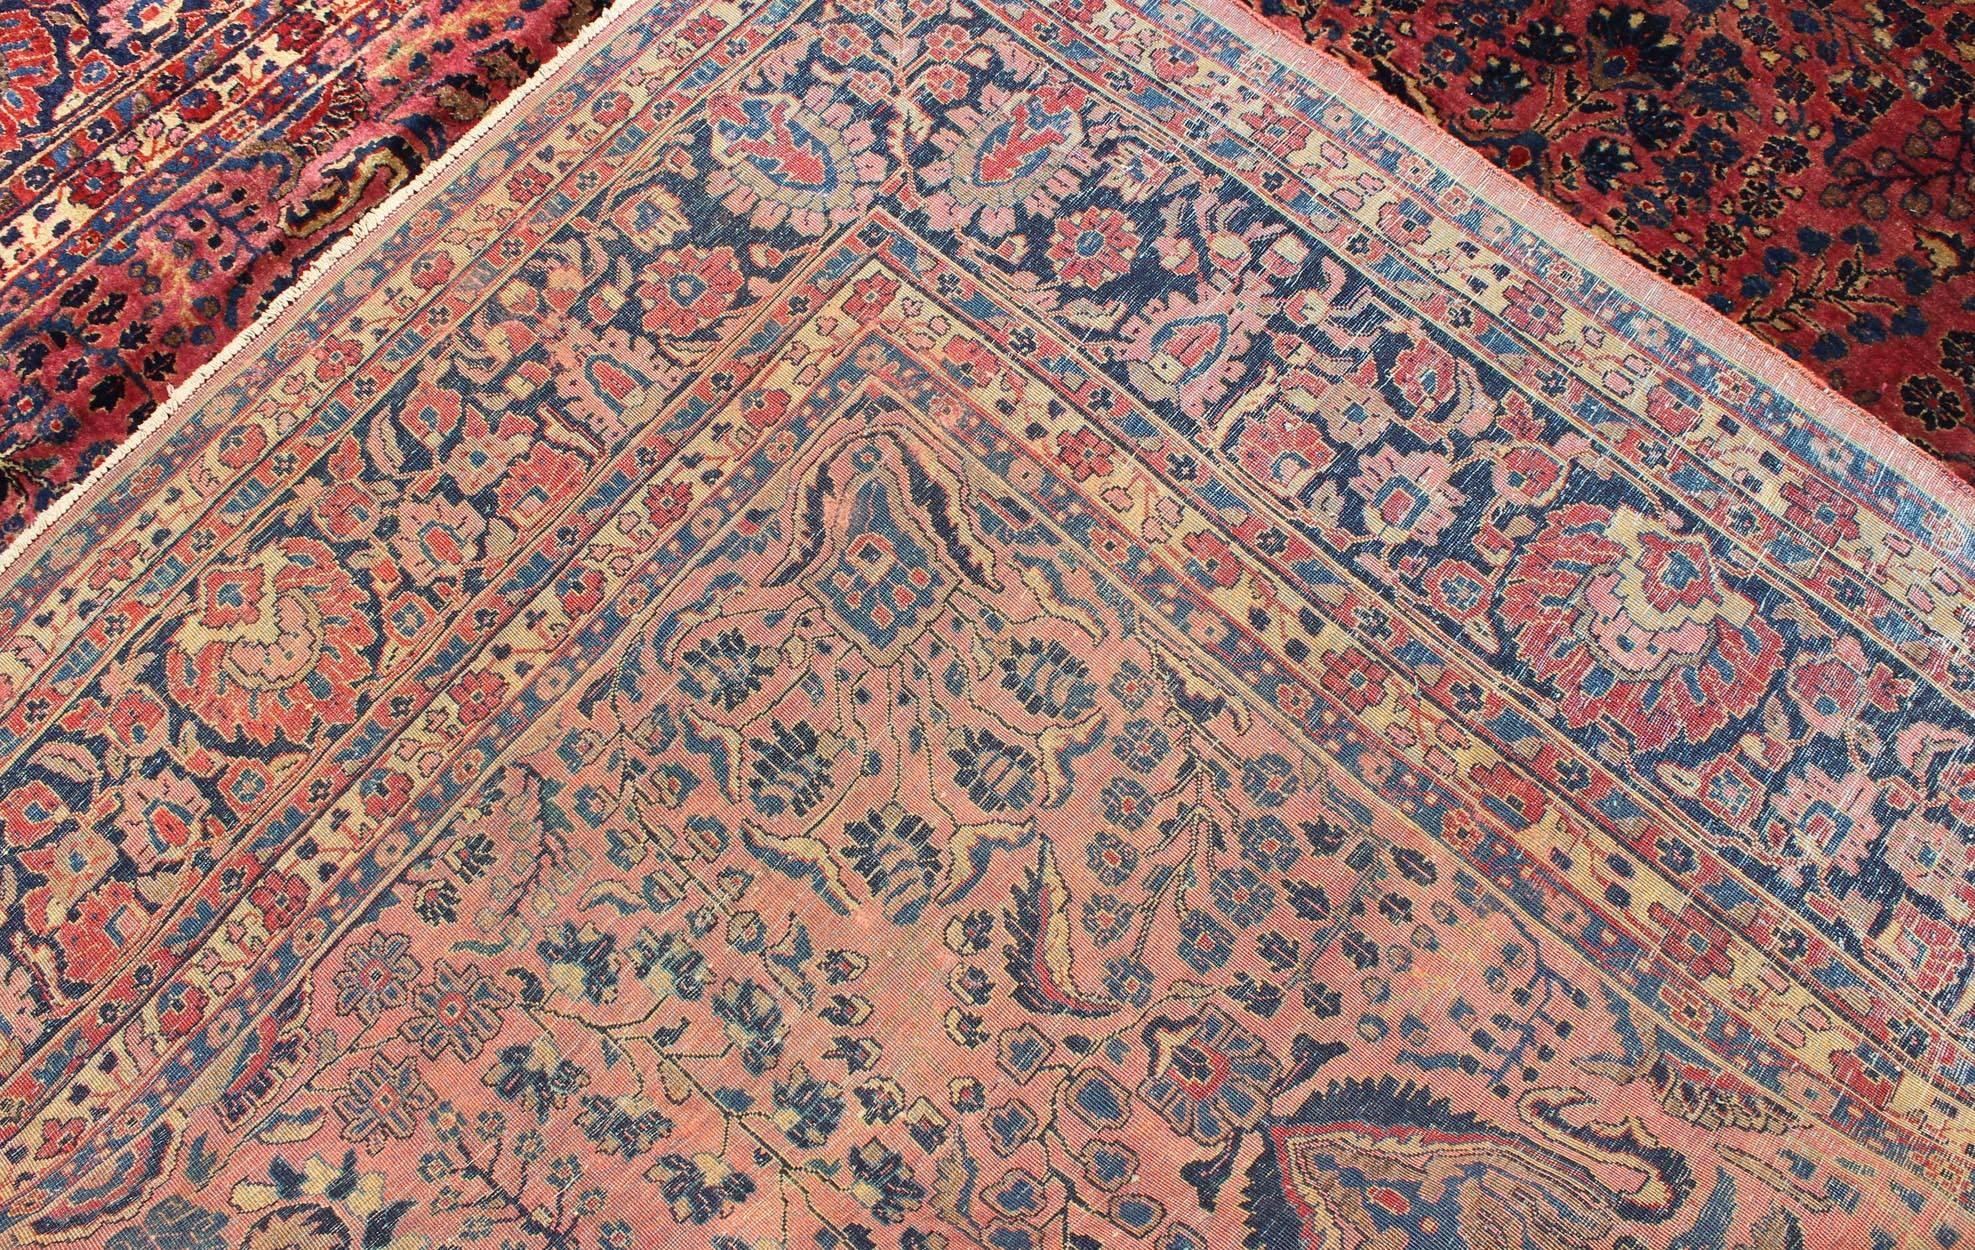 Antique Persian Sarouk Carpet with Deep Cranberry Field and Floral Elements 6